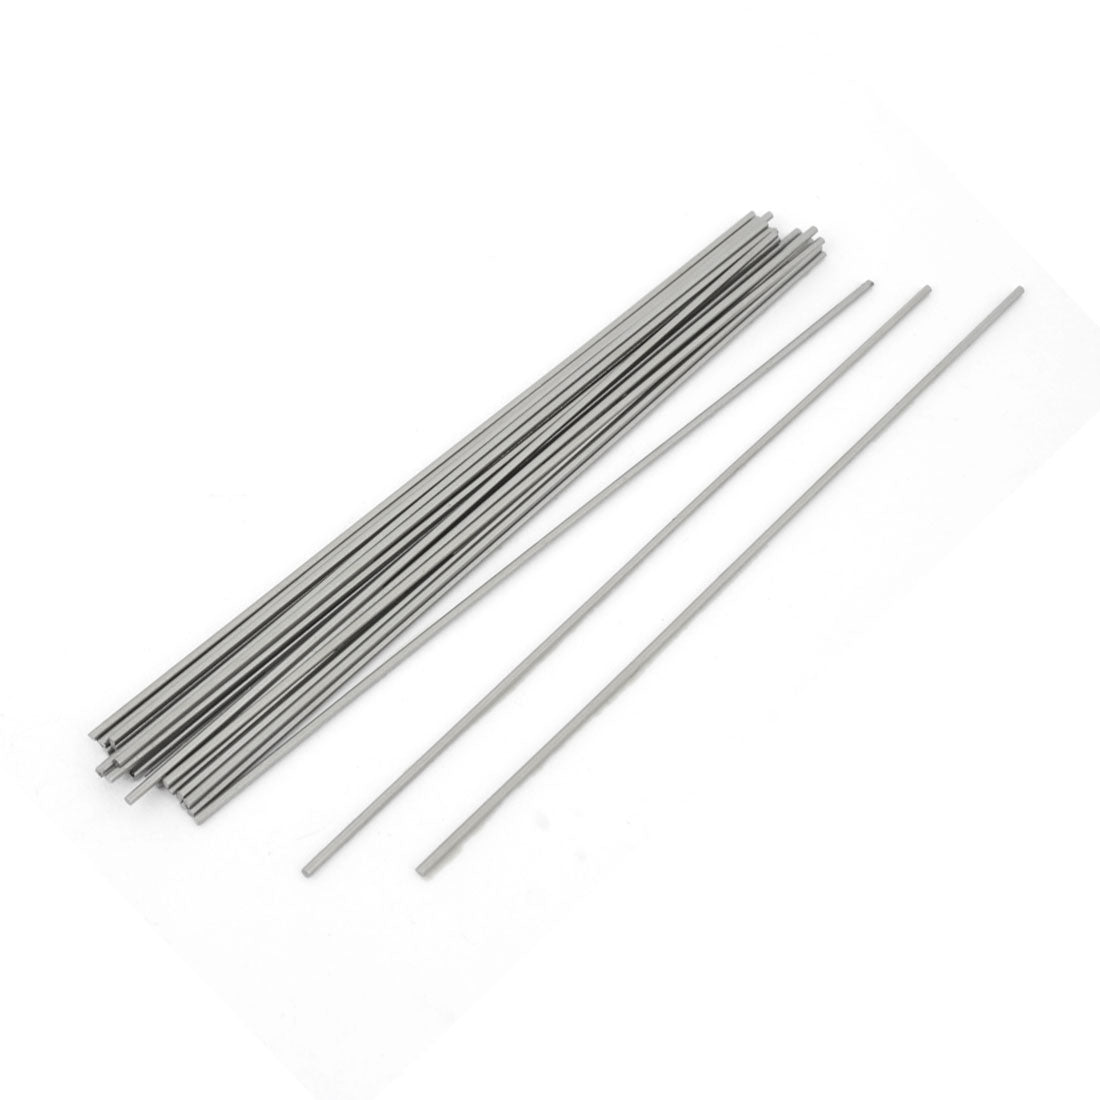 Uxcell Uxcell 50Pcs High Speed Steel Round Turning Lathe Carbide Bars 1mm x 100mm